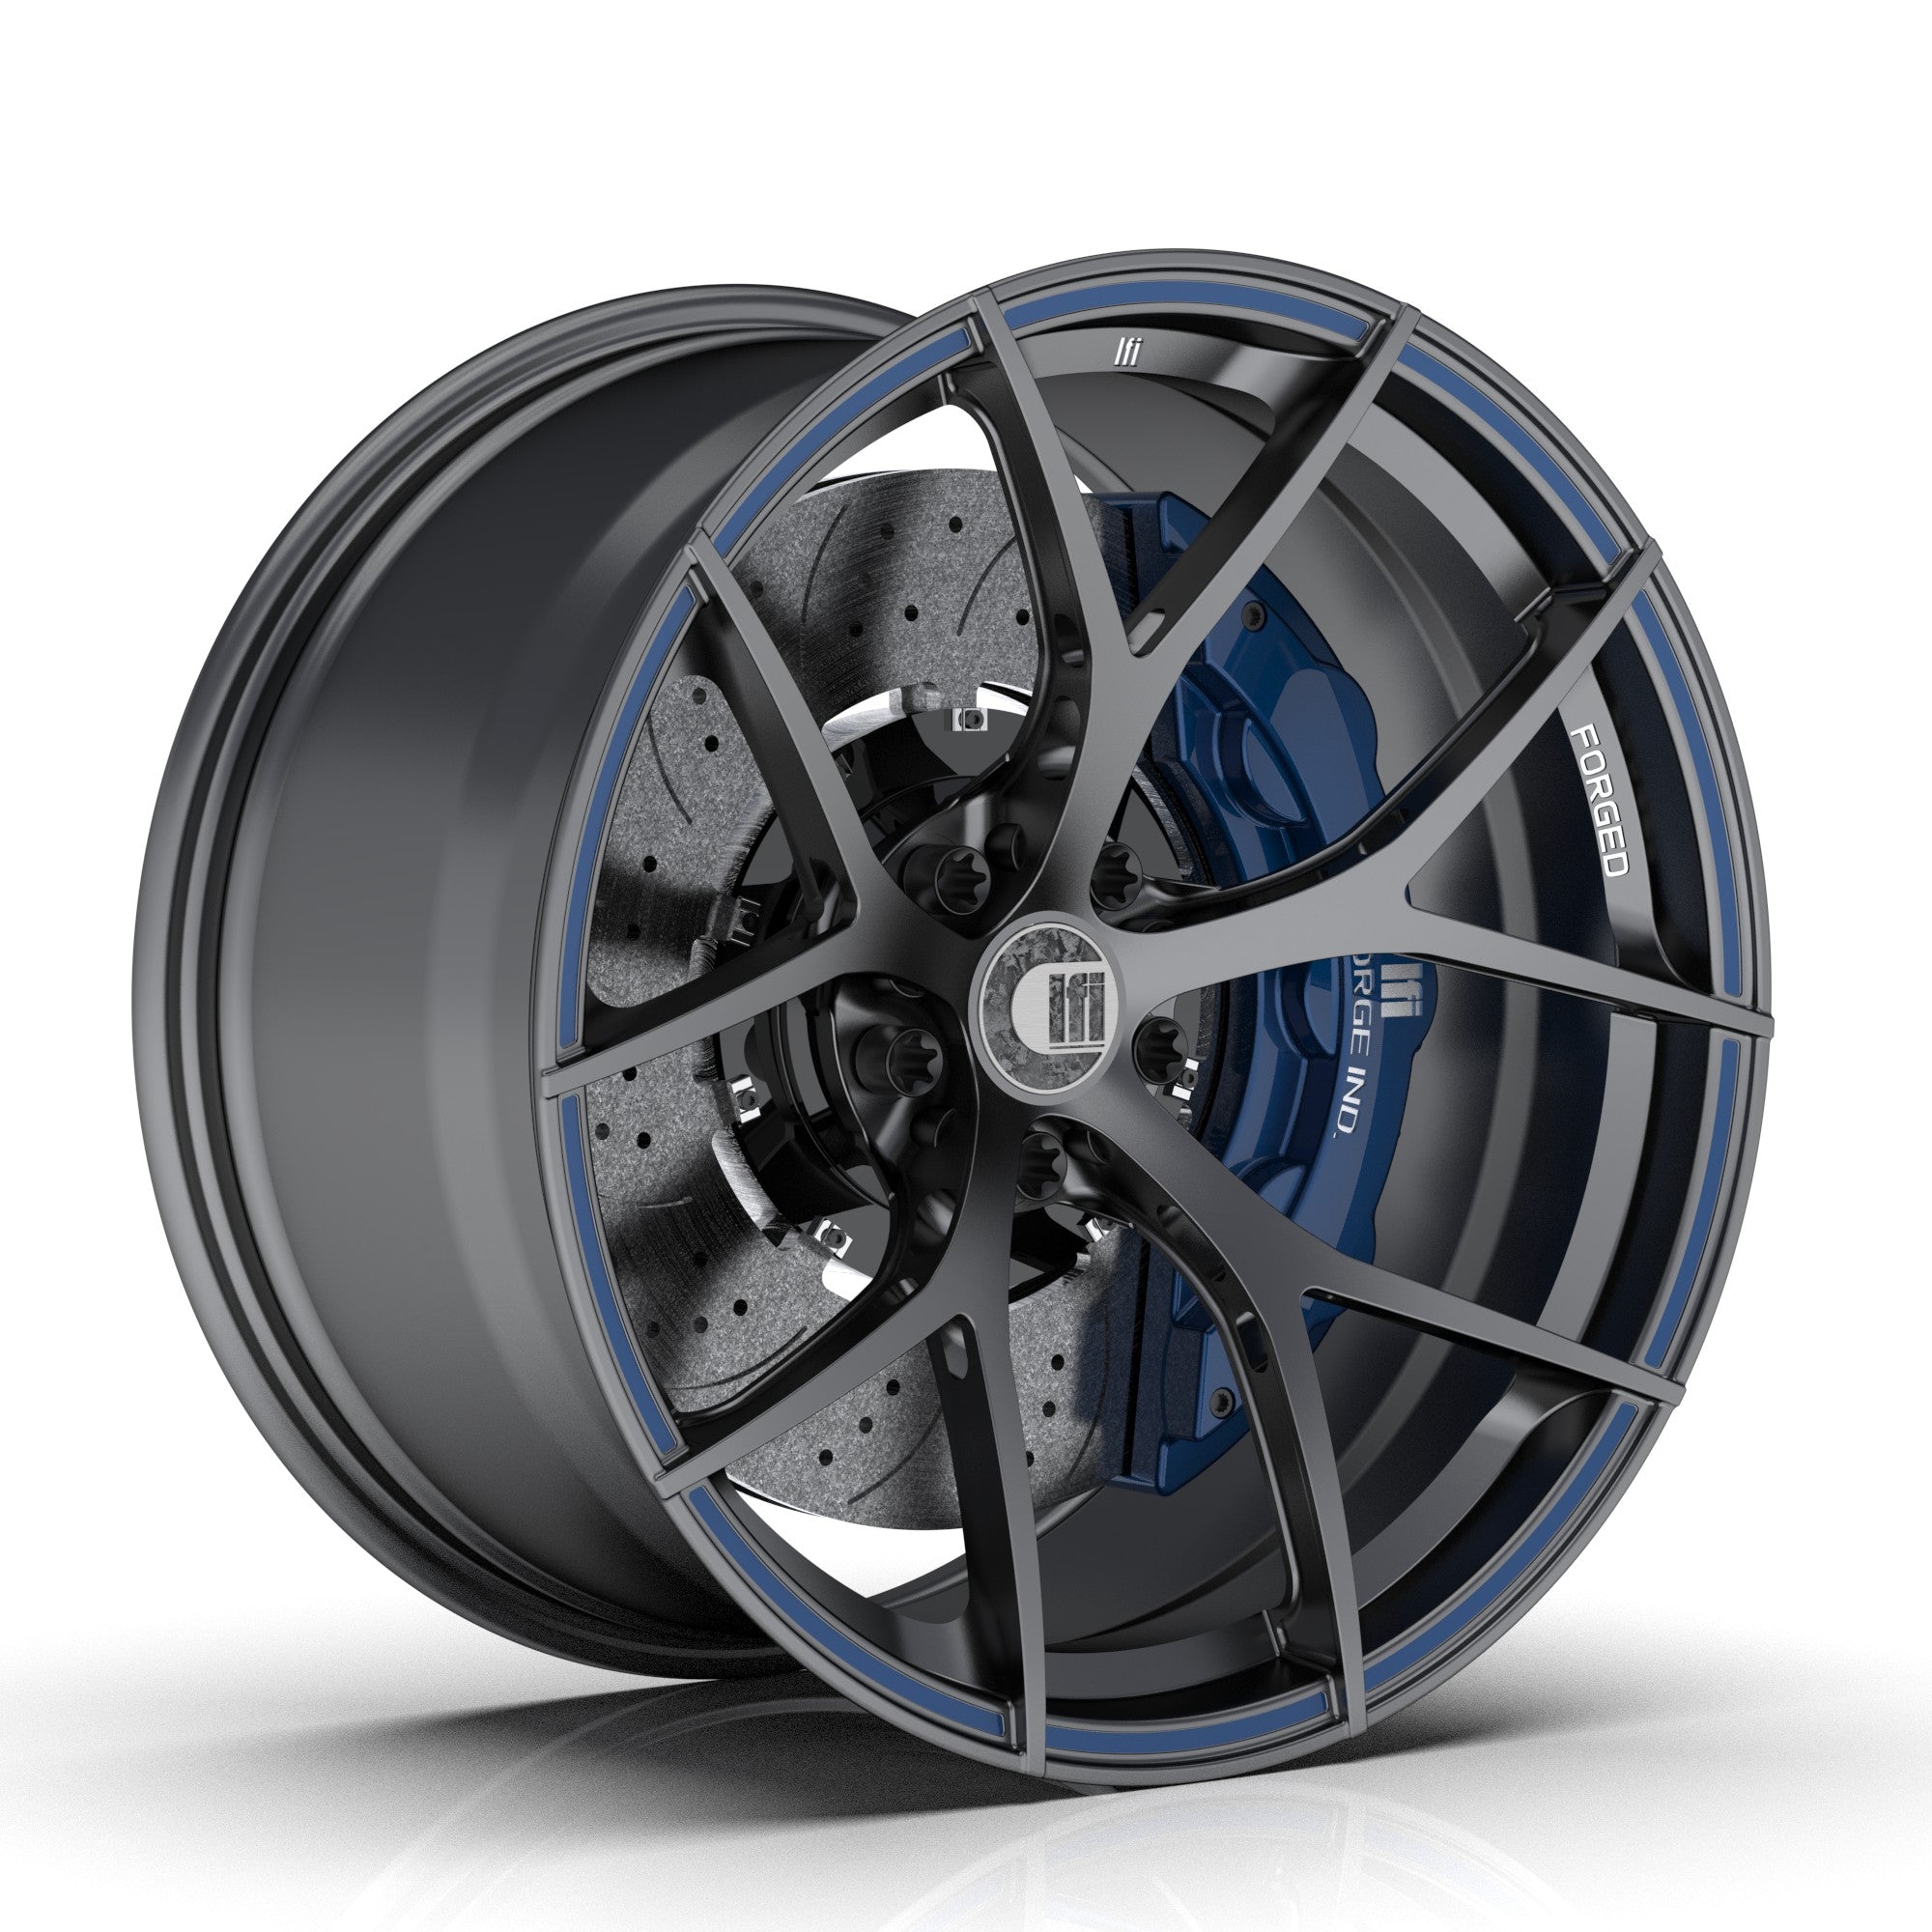 LFI REX-06M Founder's Edition Magnesium Forged Wheel